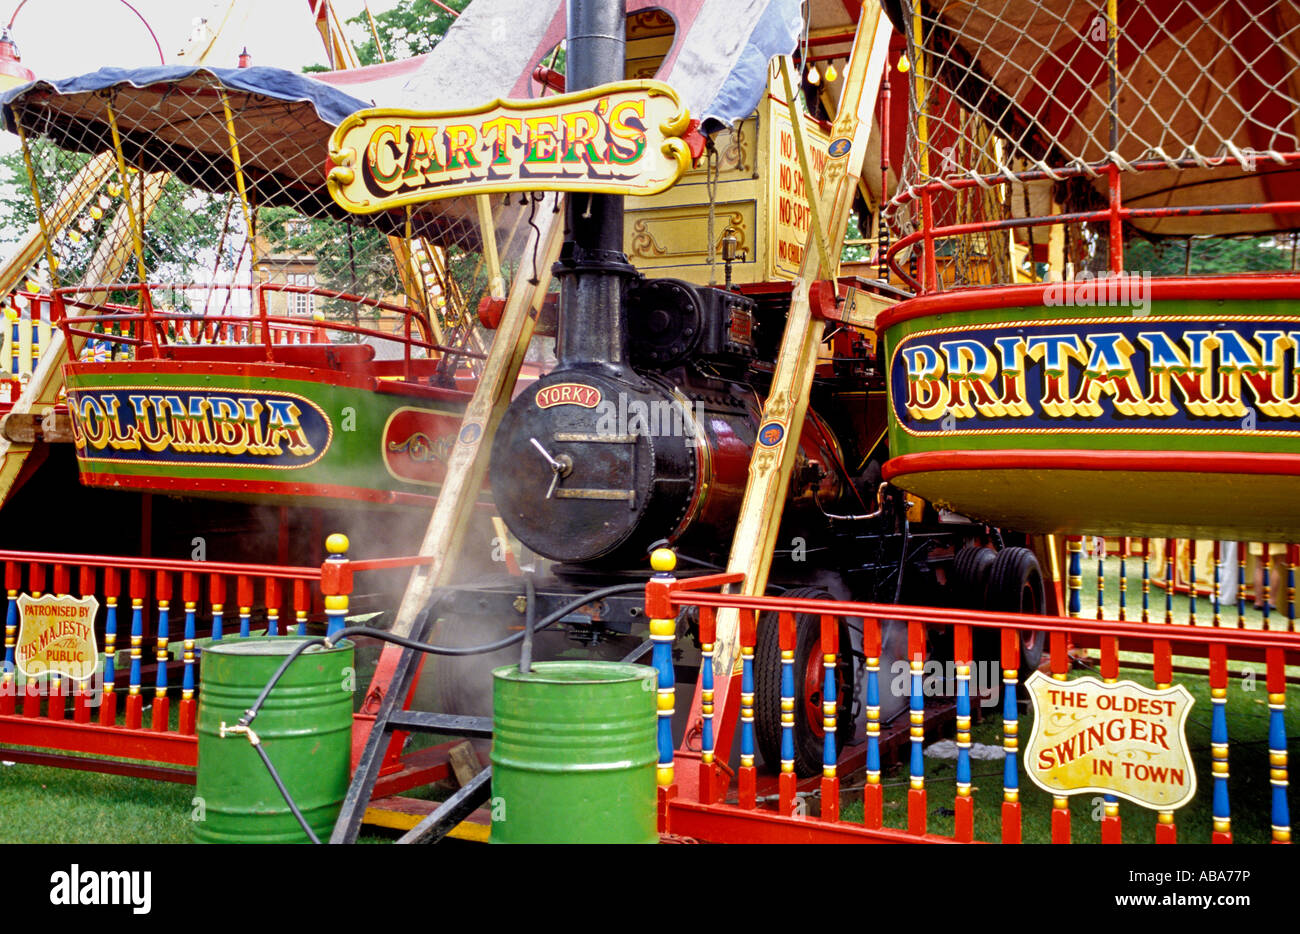 Yorky, a 1901 Savage steam engine powering and driving two Steam Yachts fairground rides, Carters Steam fair, Chiswick, London Stock Photo